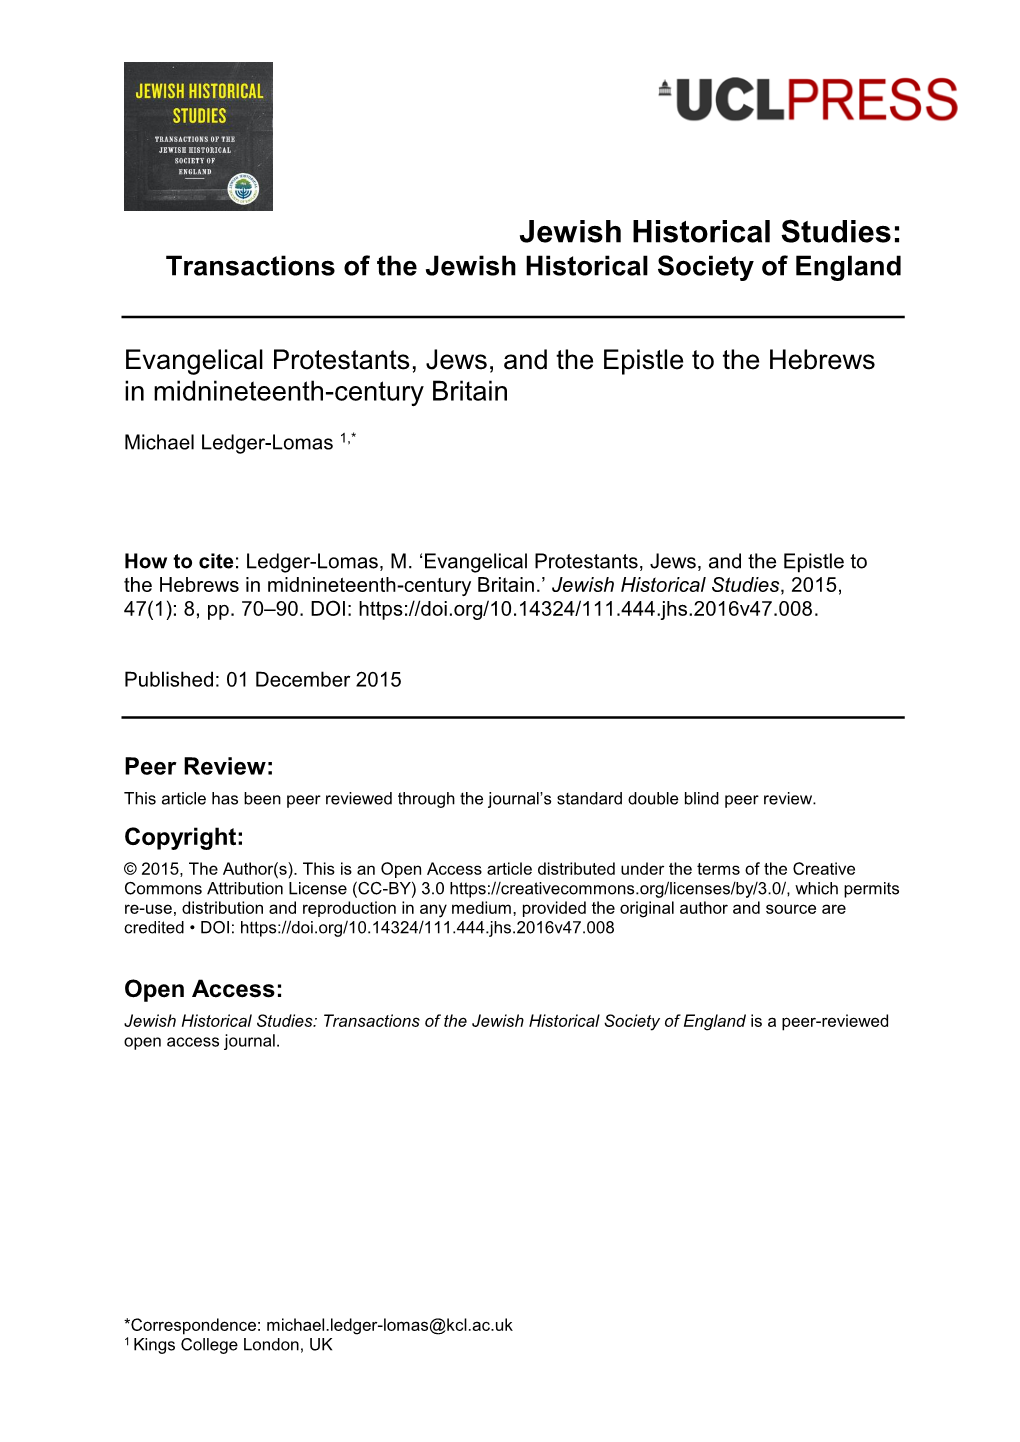 Evangelical Protestants, Jews, and the Epistle to the Hebrews in Midnineteenth-Century Britain